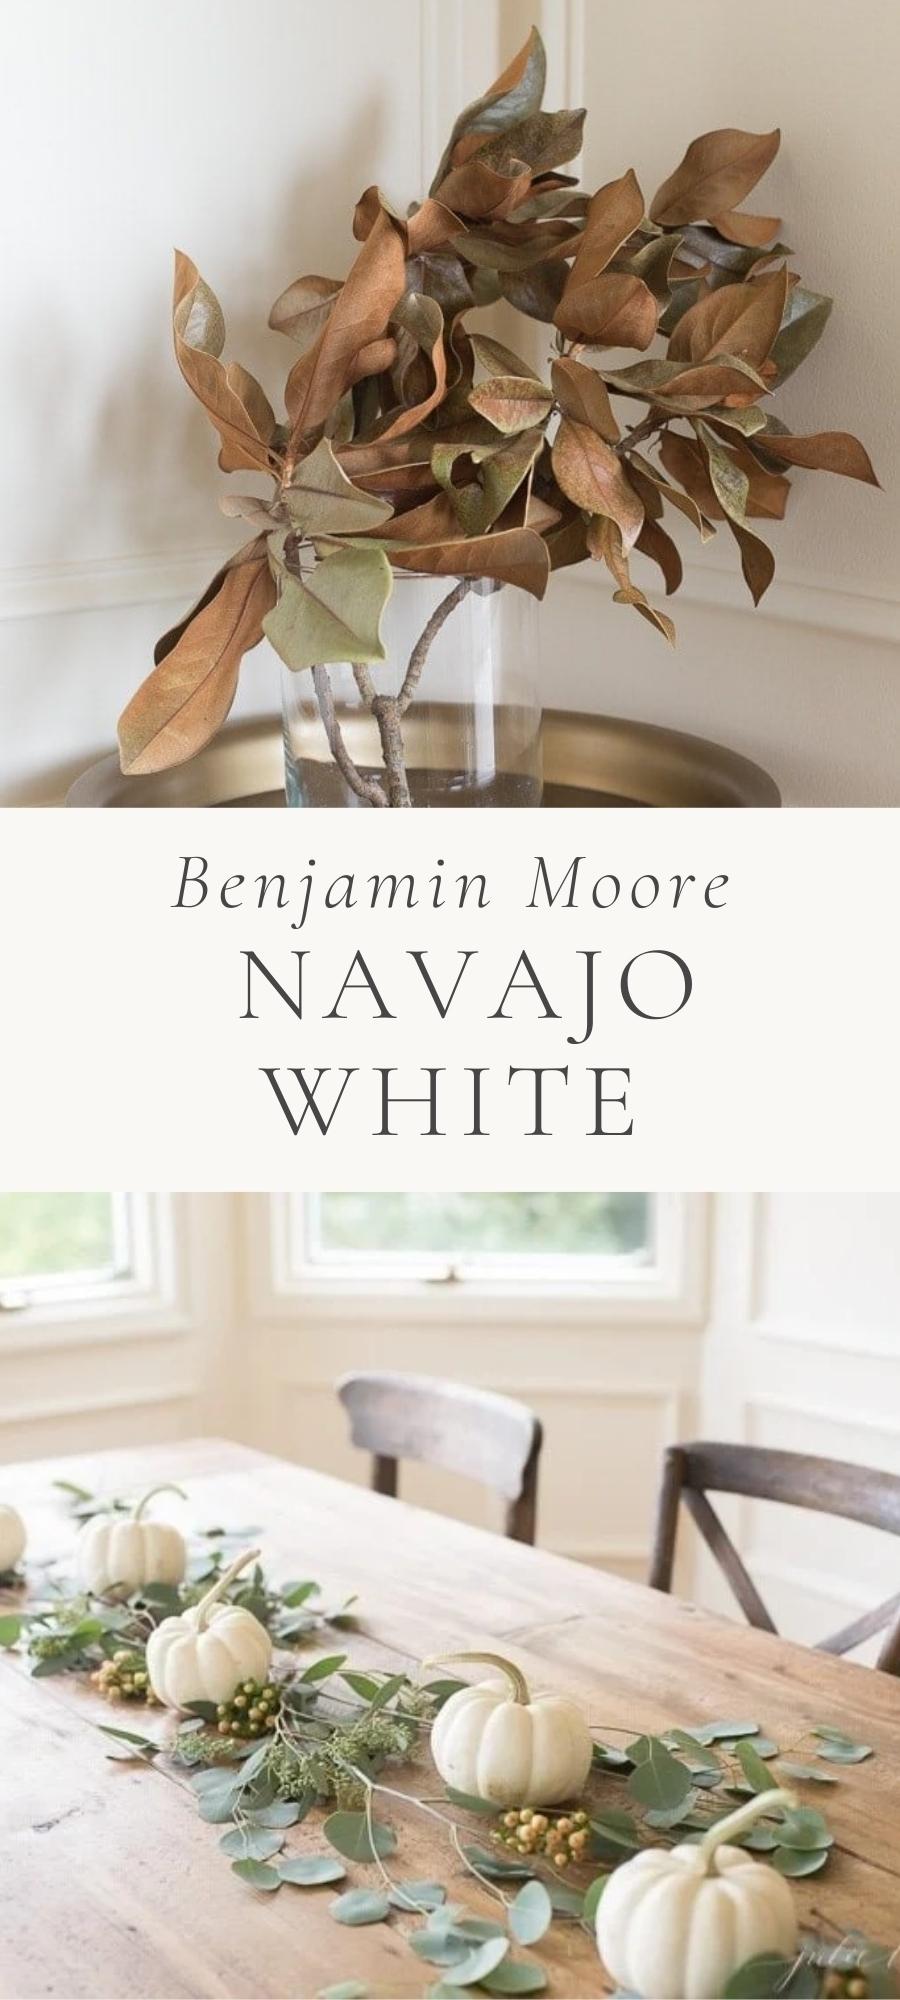 Benjamin Moore Navajo White paint color with fall decor